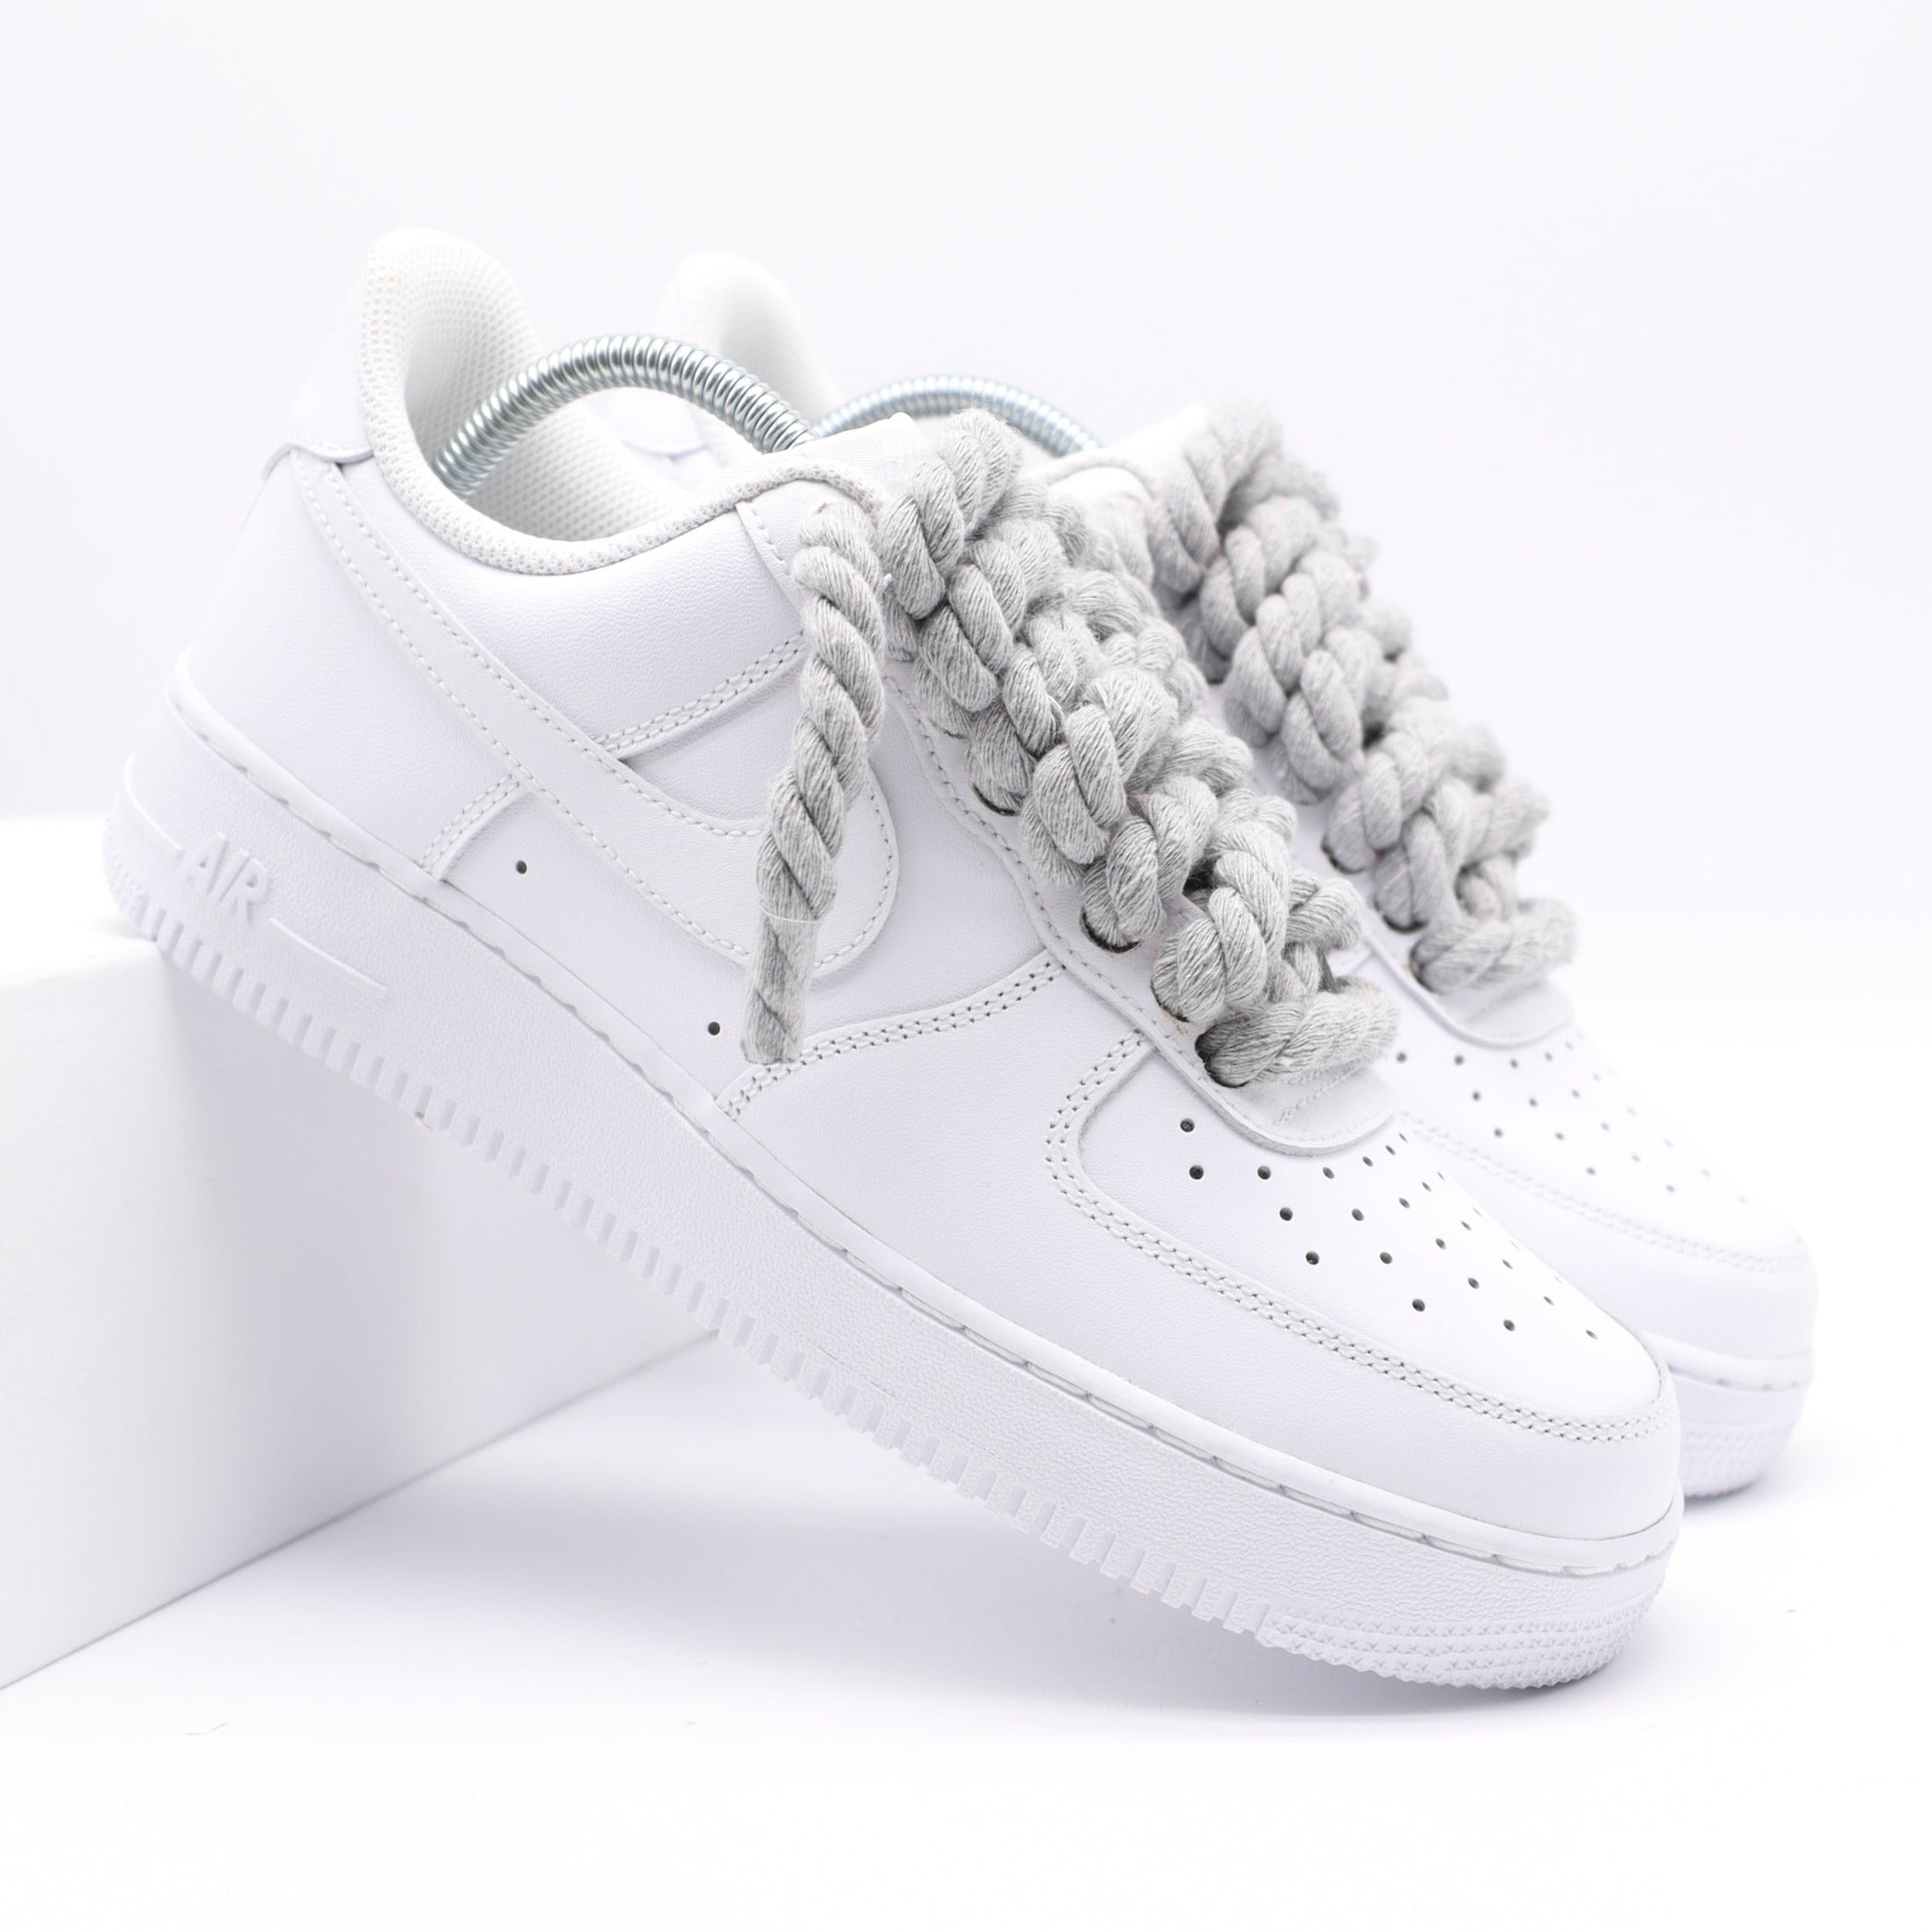 airforce 1 coffee rope laces｜TikTok Search